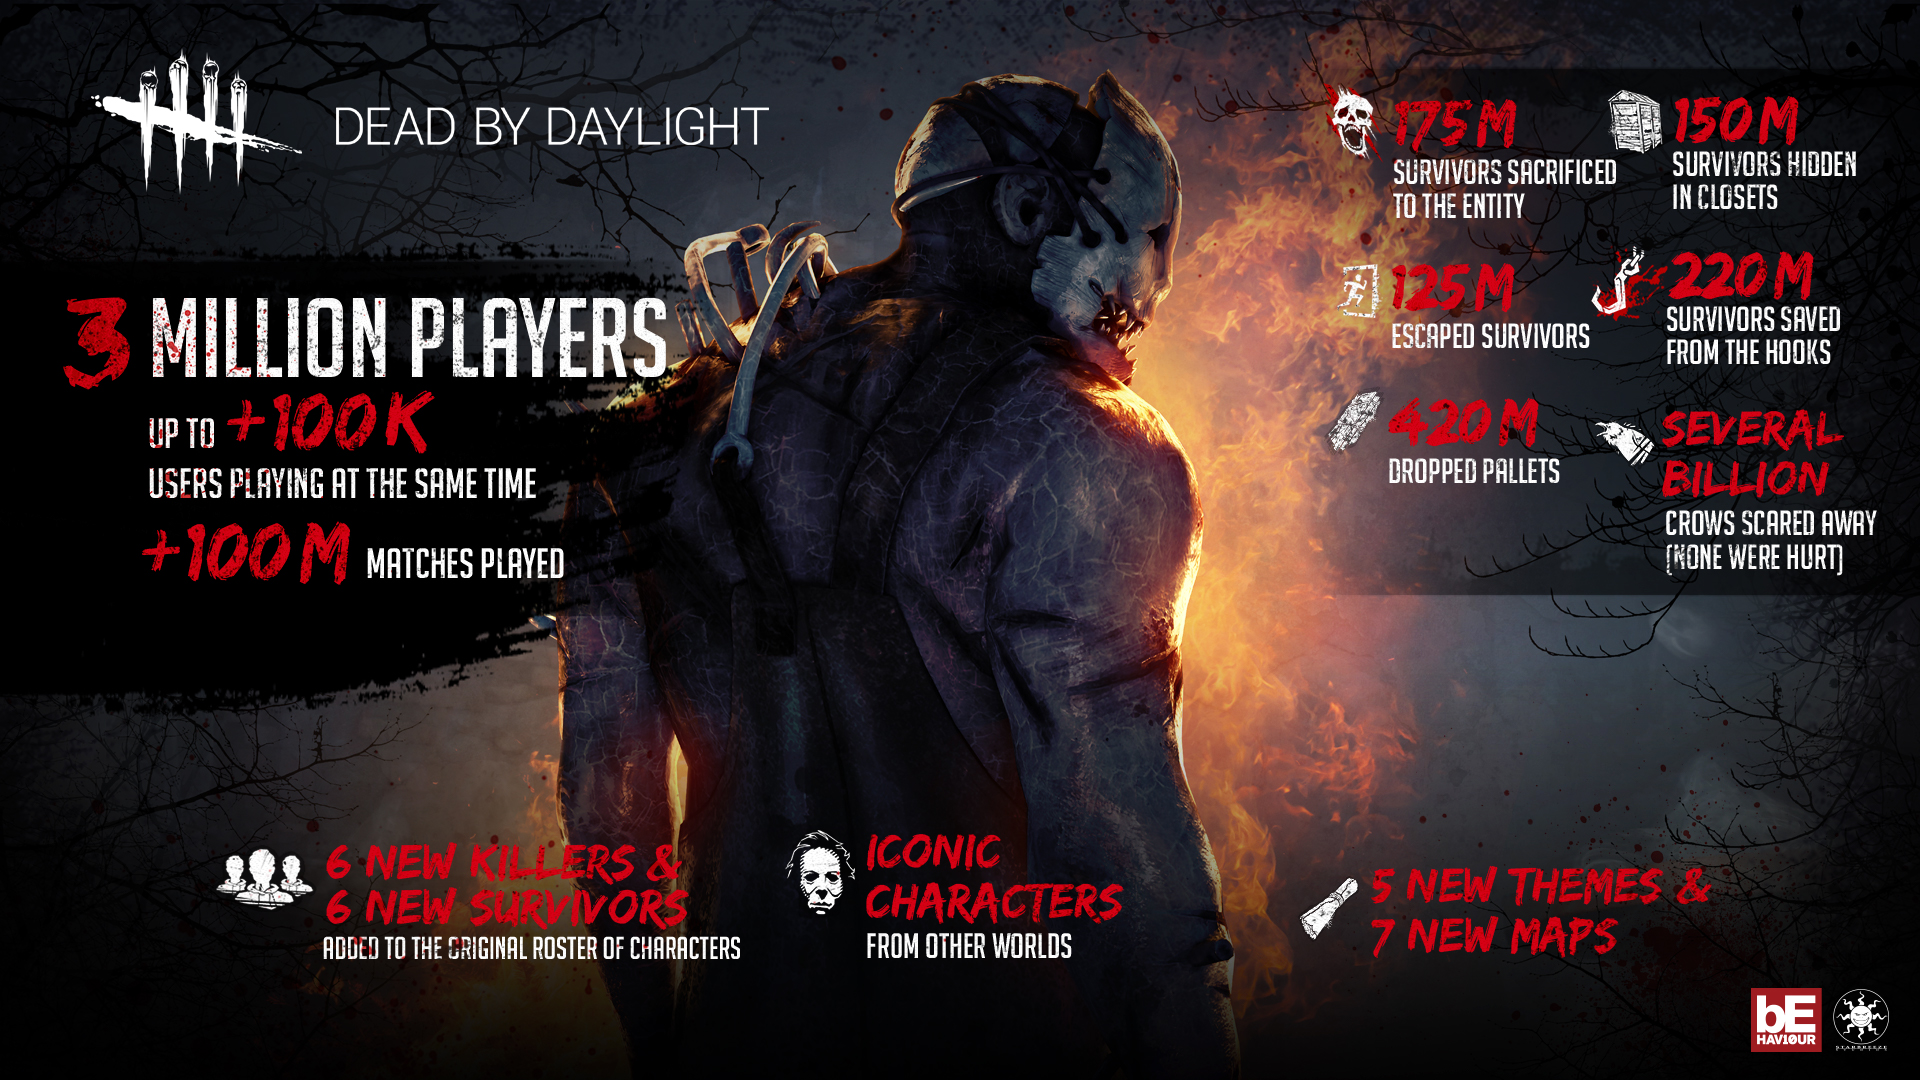 Dead By Daylight Surpasses 3 Million Sold Games As The Title